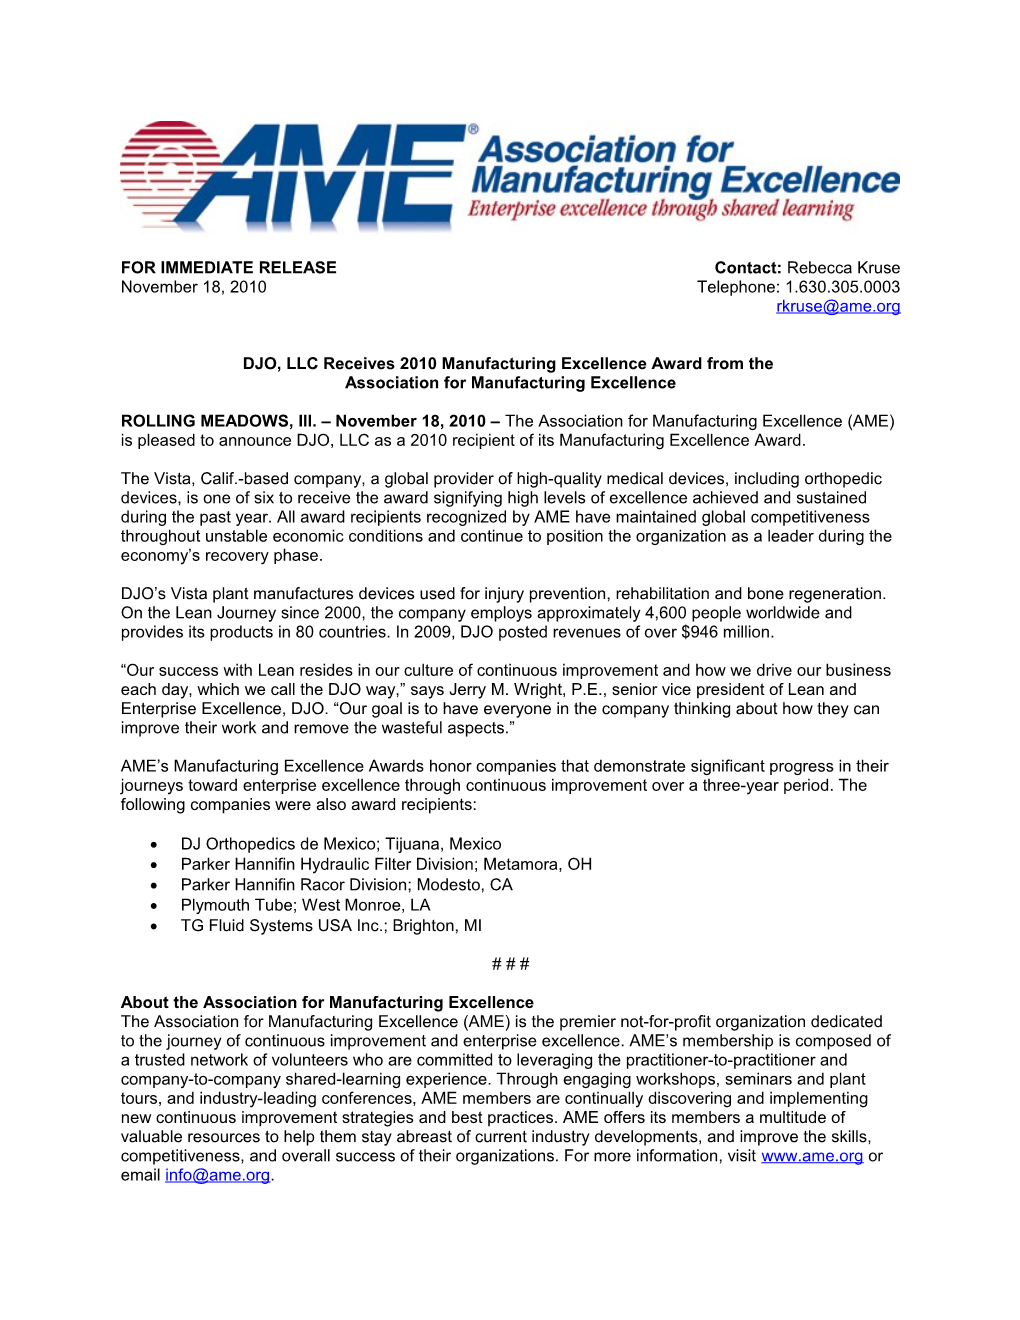 DJO, LLC Receives 2010 Manufacturing Excellence Award from The